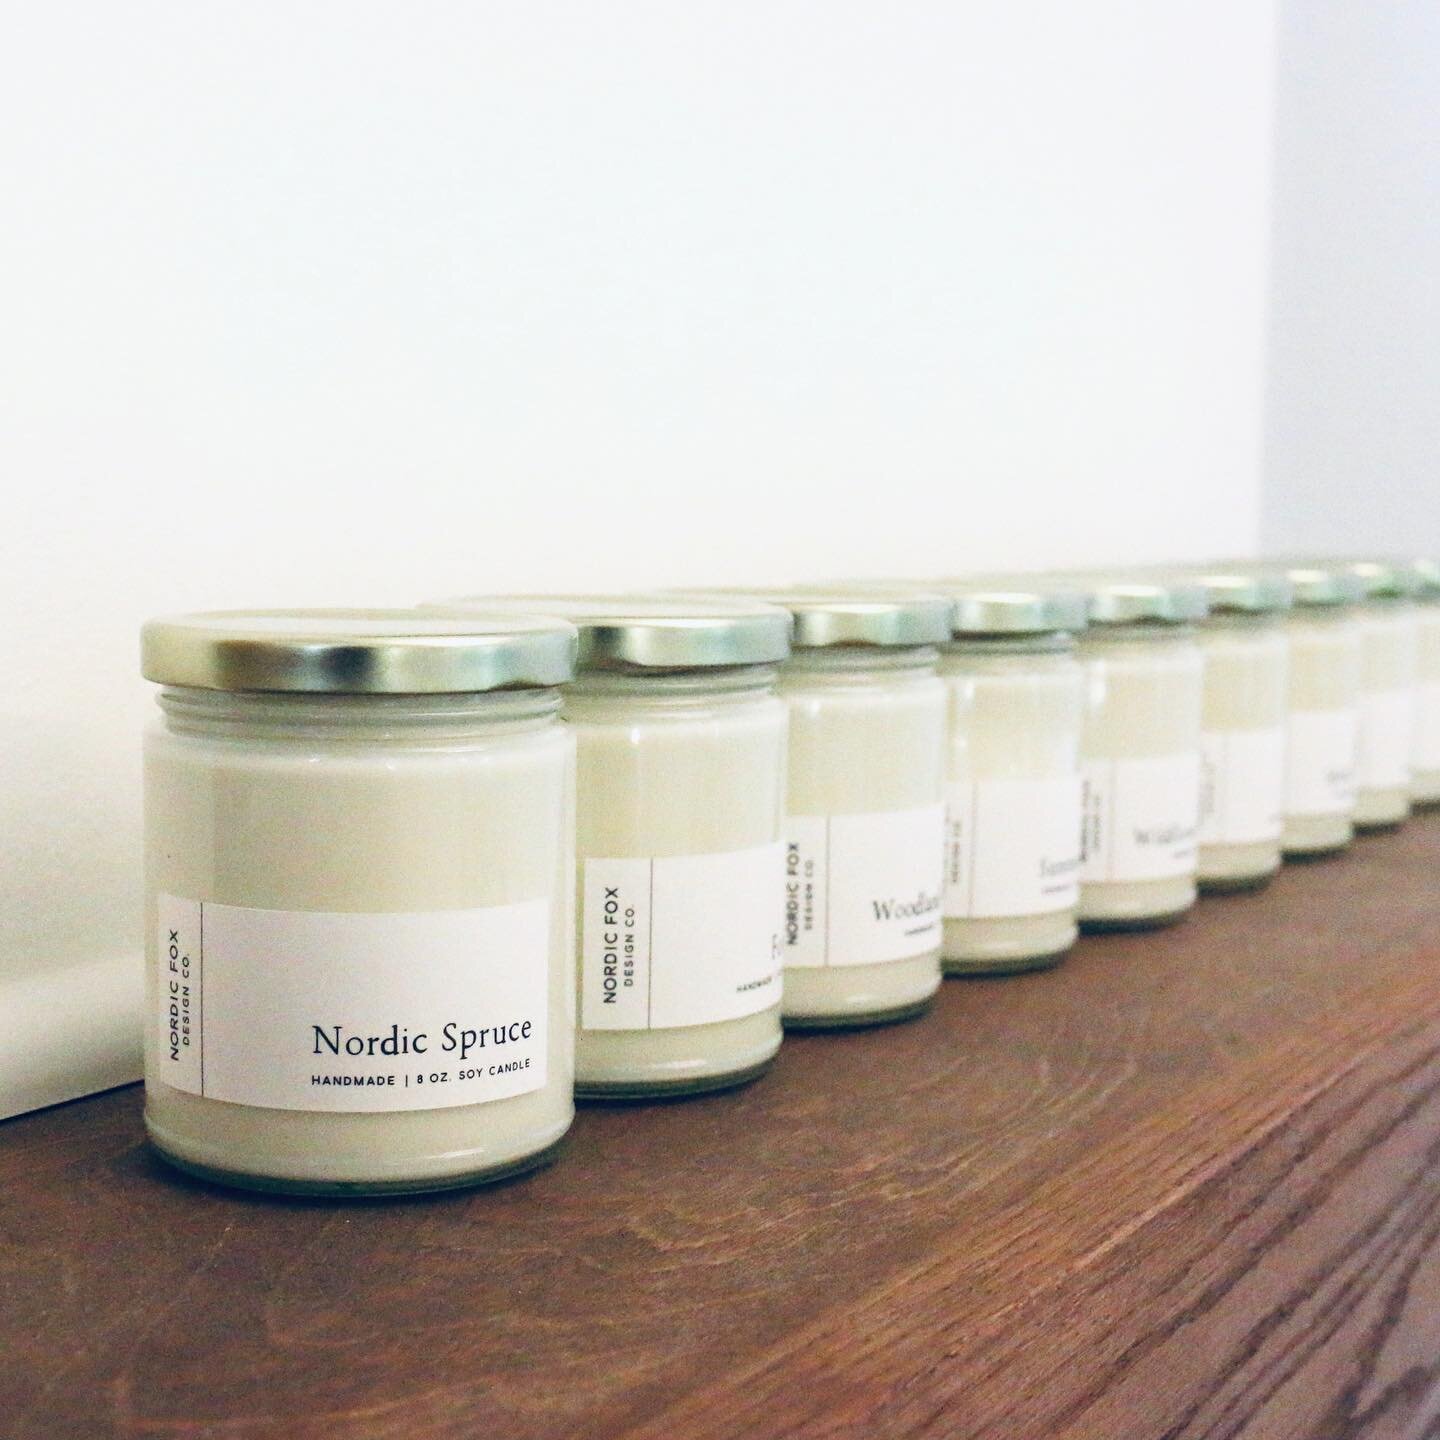 Soy candles with Scandinavian inspired scents, handmade in small batches at a farmhouse in Oregon. ✨ 
⠀⠀⠀⠀⠀⠀⠀⠀⠀
#scandinavian #scandinaviandesign #nordicshopping #handmadegoods #madeinoregon #oregoncity